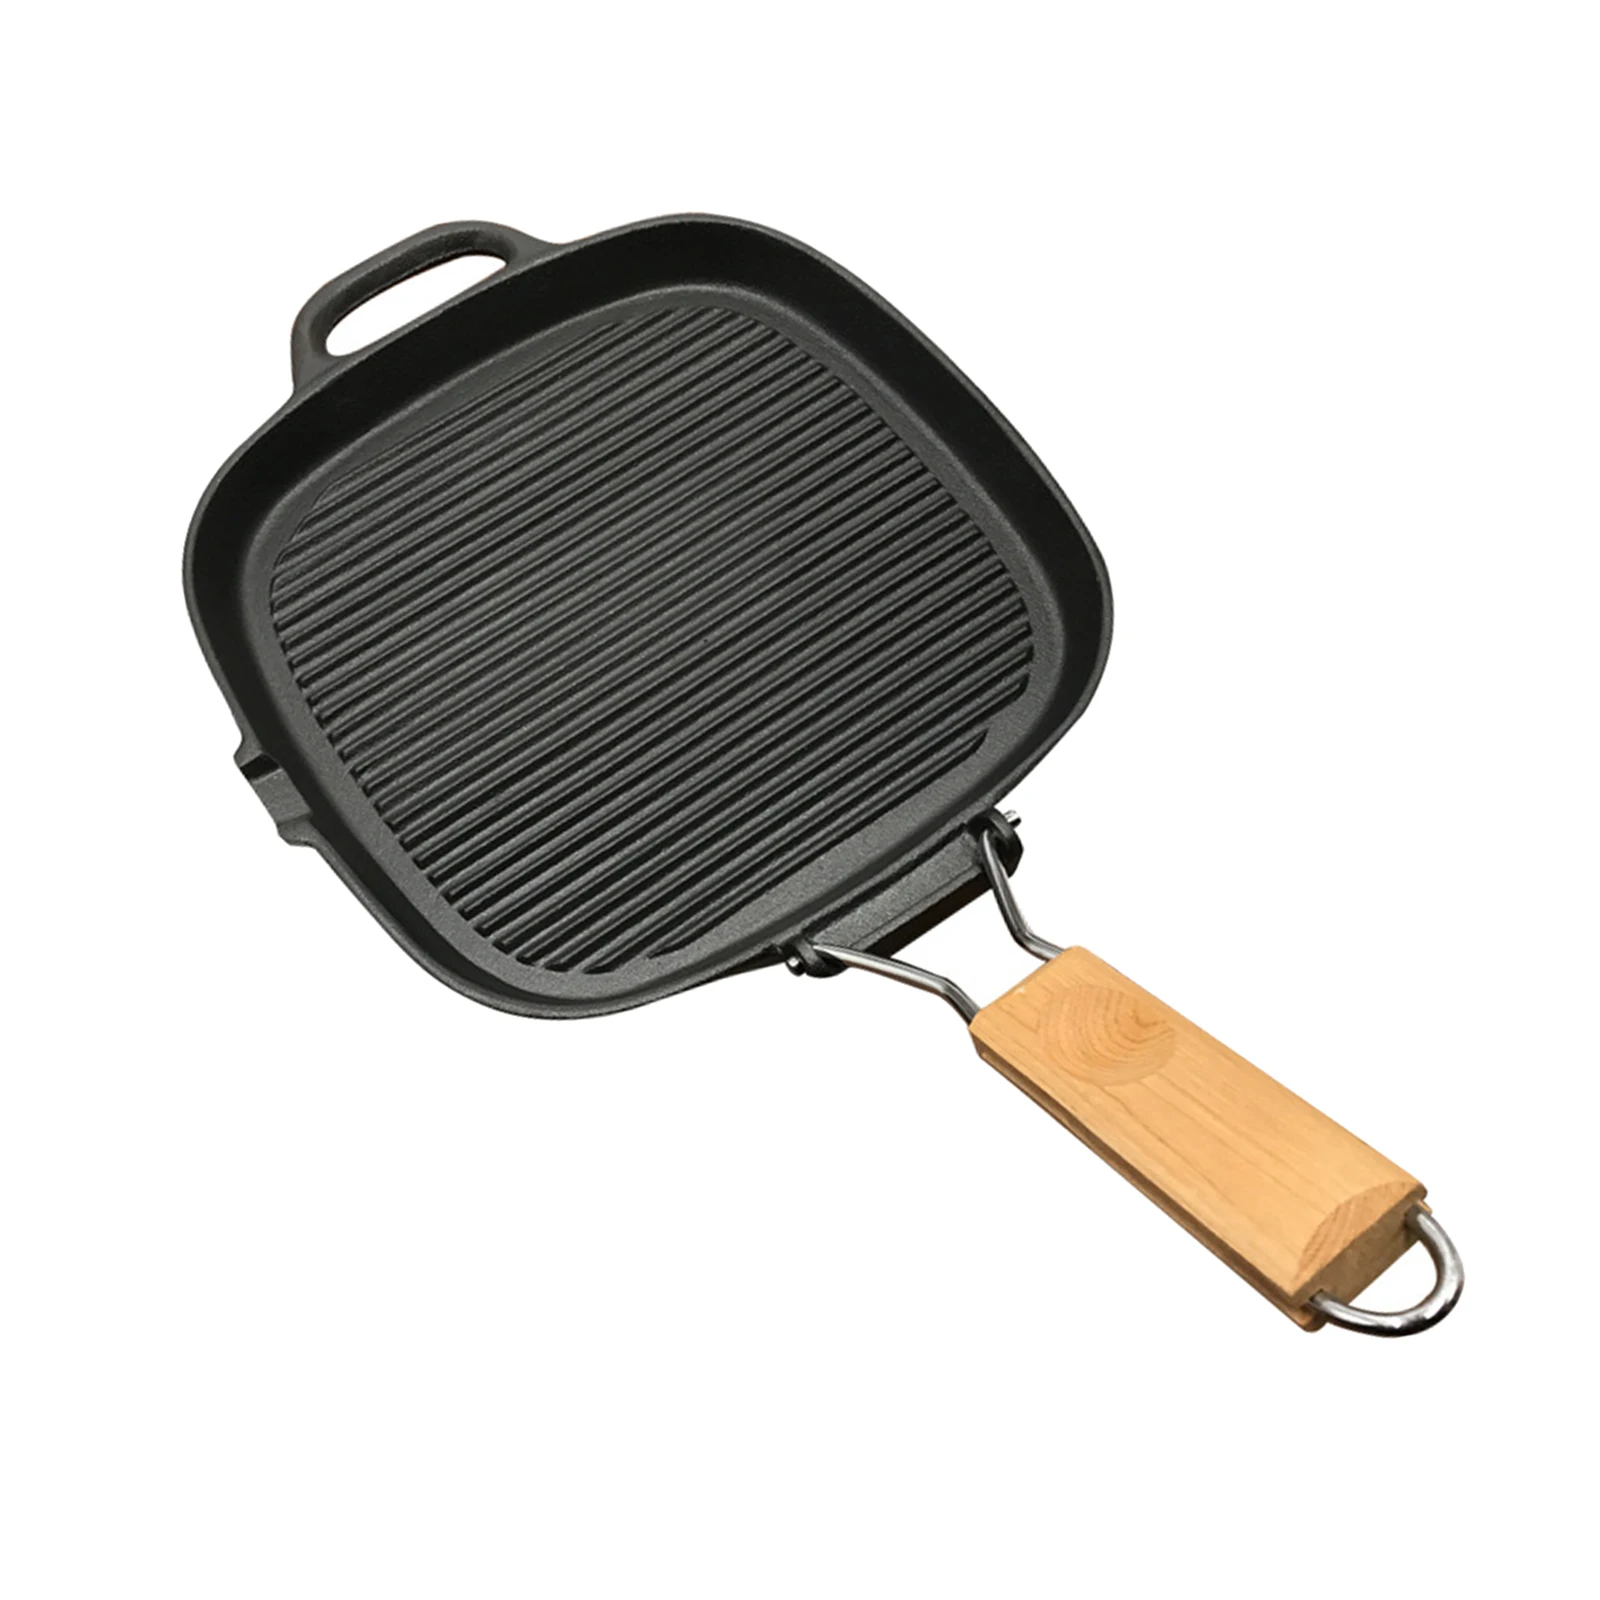 Reversible Cast Iron Non-Stick Grill Plate for Gas Stove BBQ Camping 25cm 